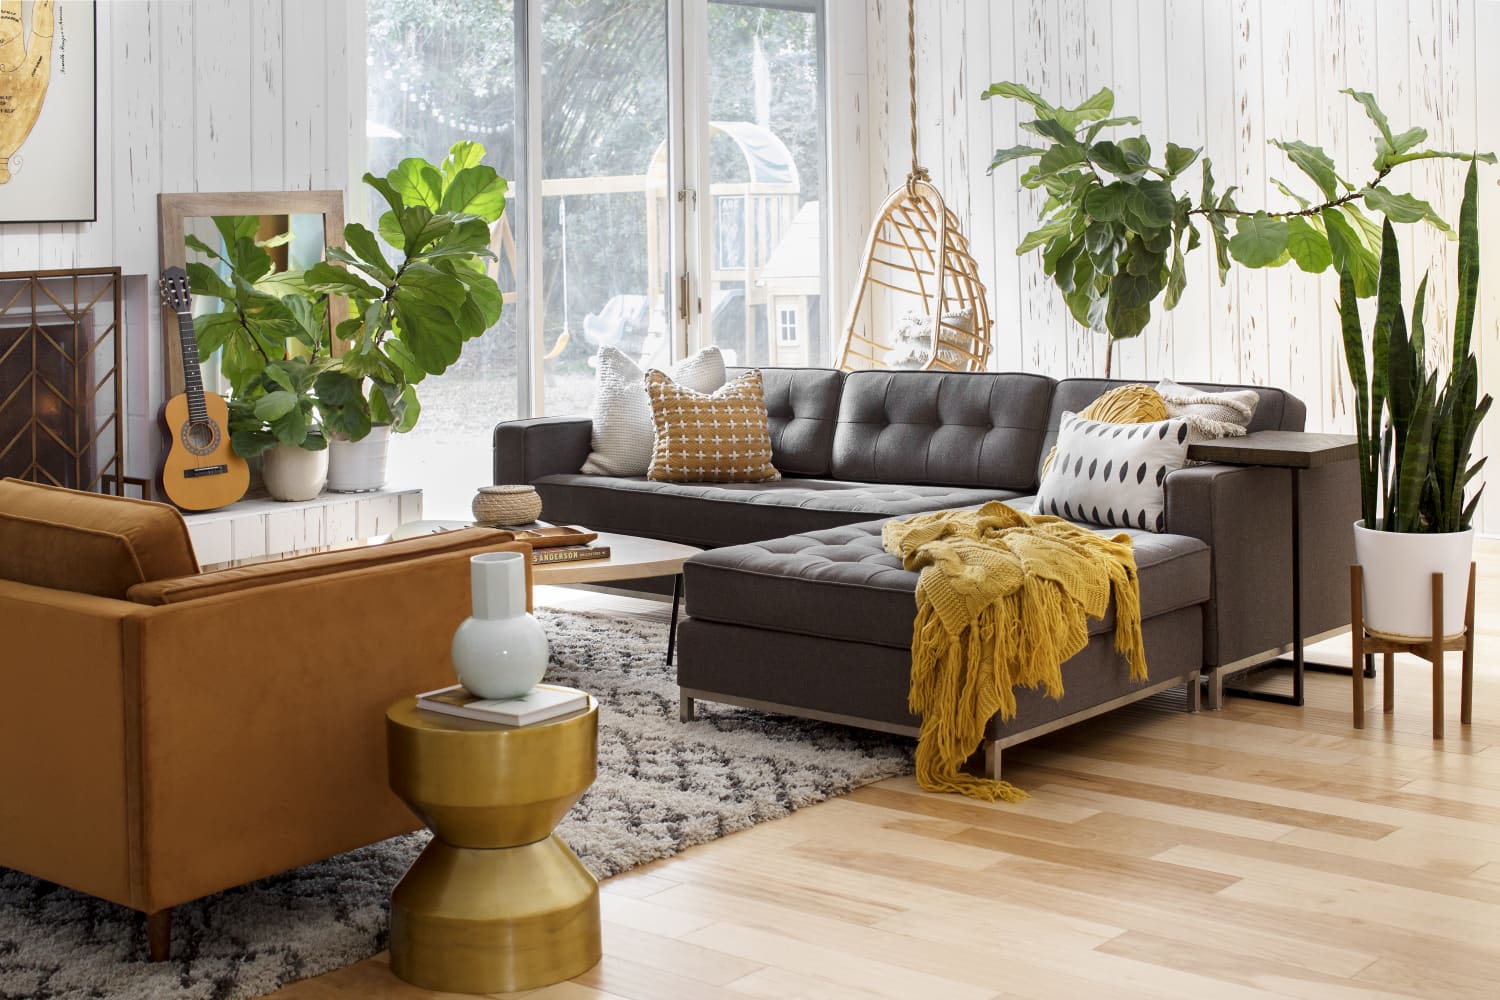 These Are the Top Home Trends of 2022, According to TaskRabbit